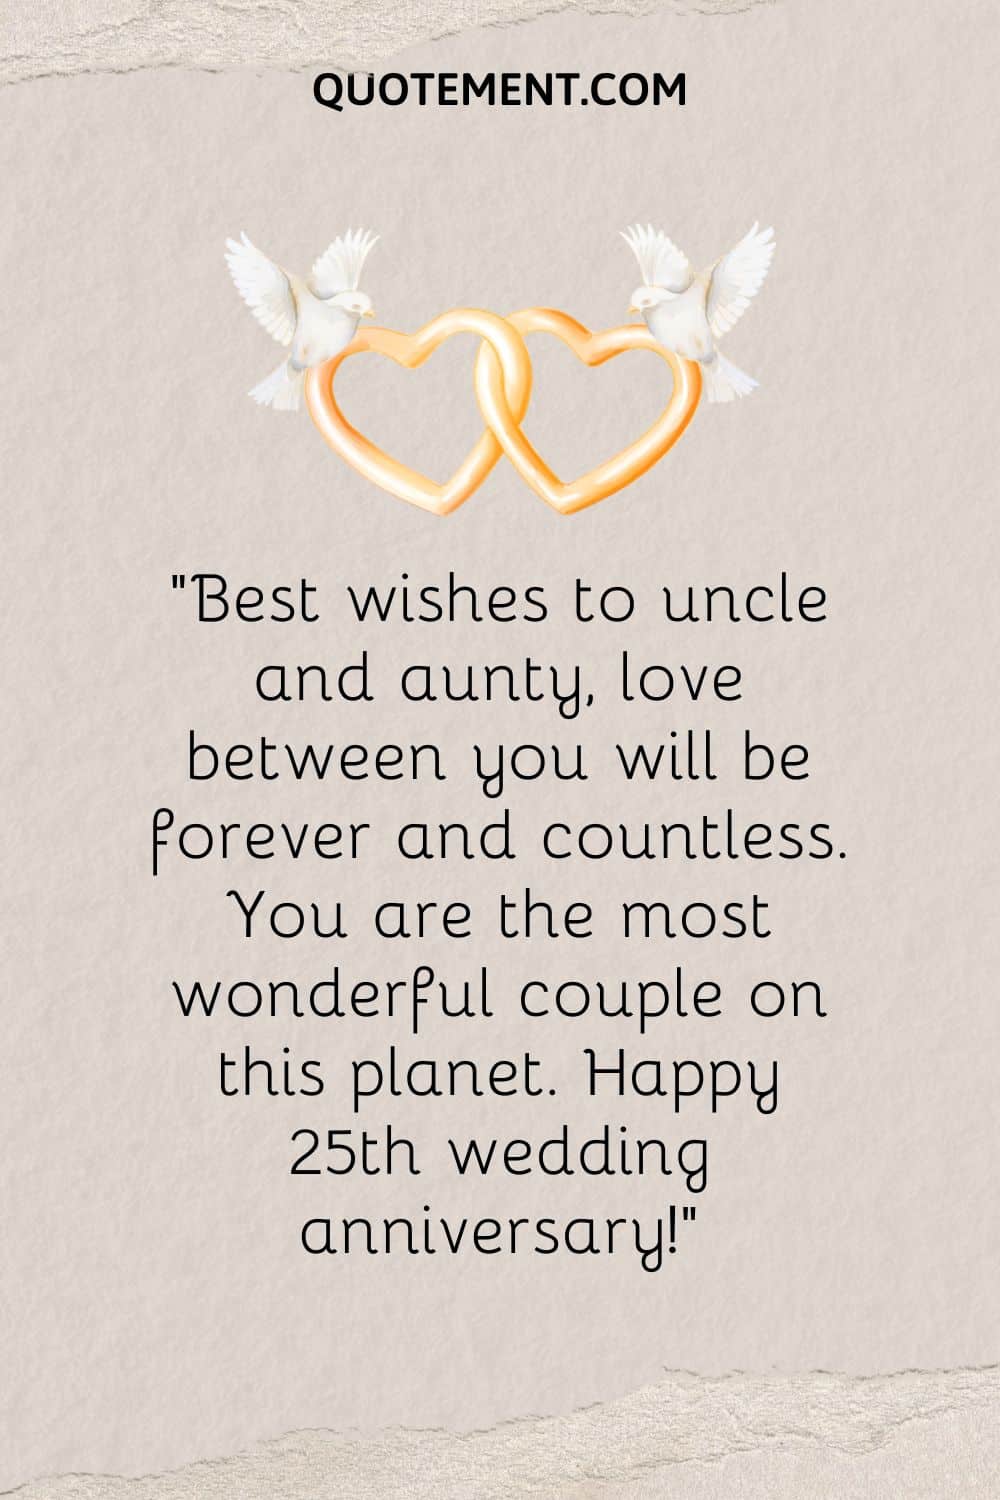 Best wishes to uncle and aunty, love between you will be forever and countless